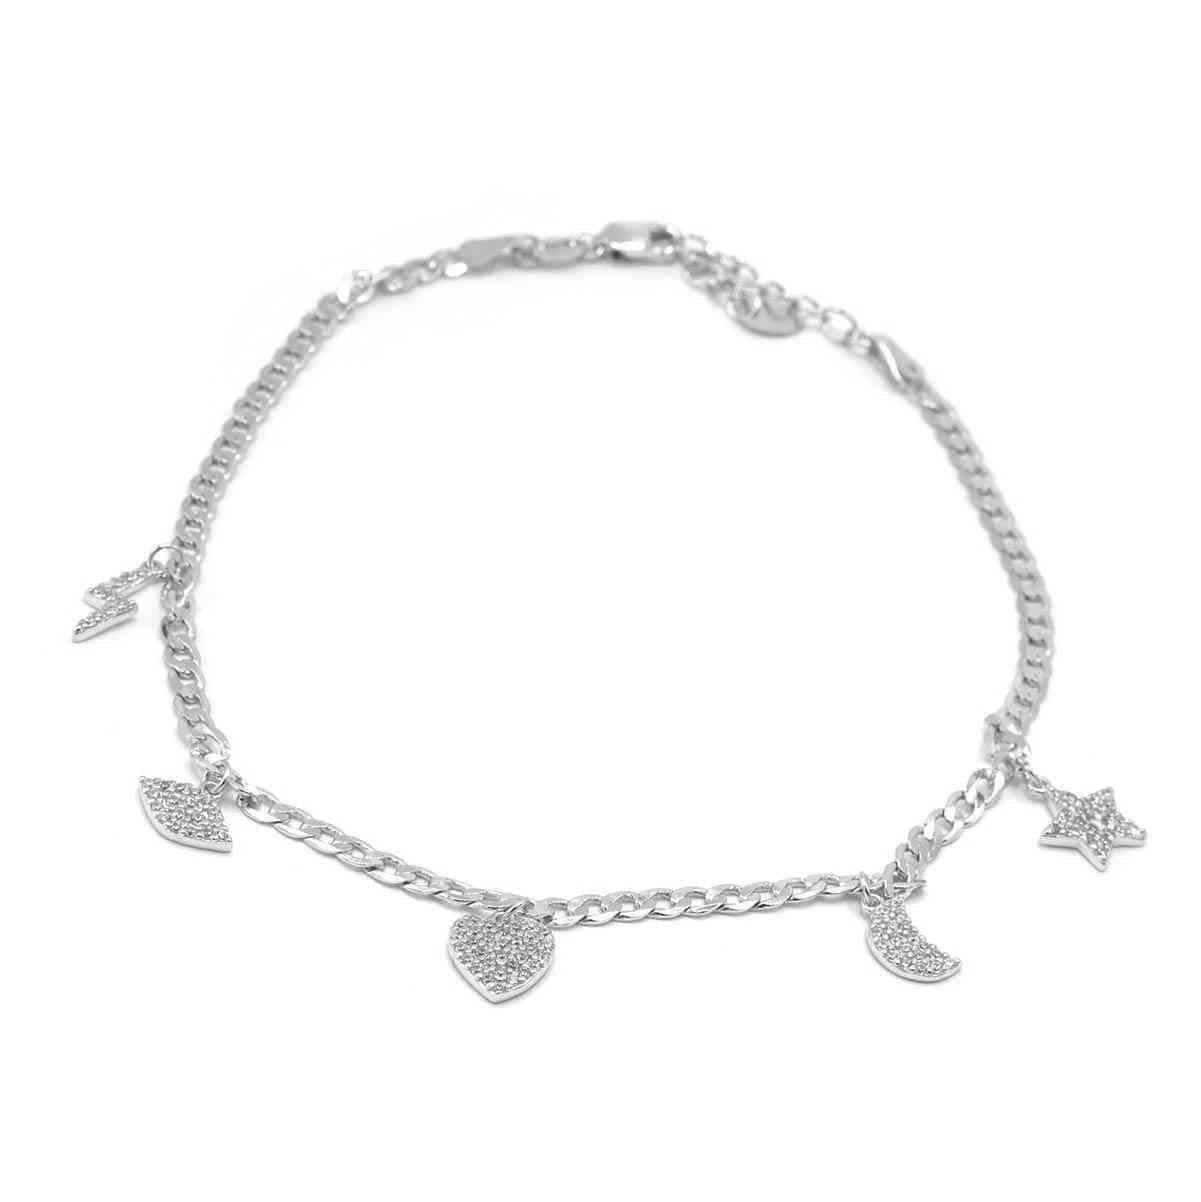 STAW-15 10 inch Anklets